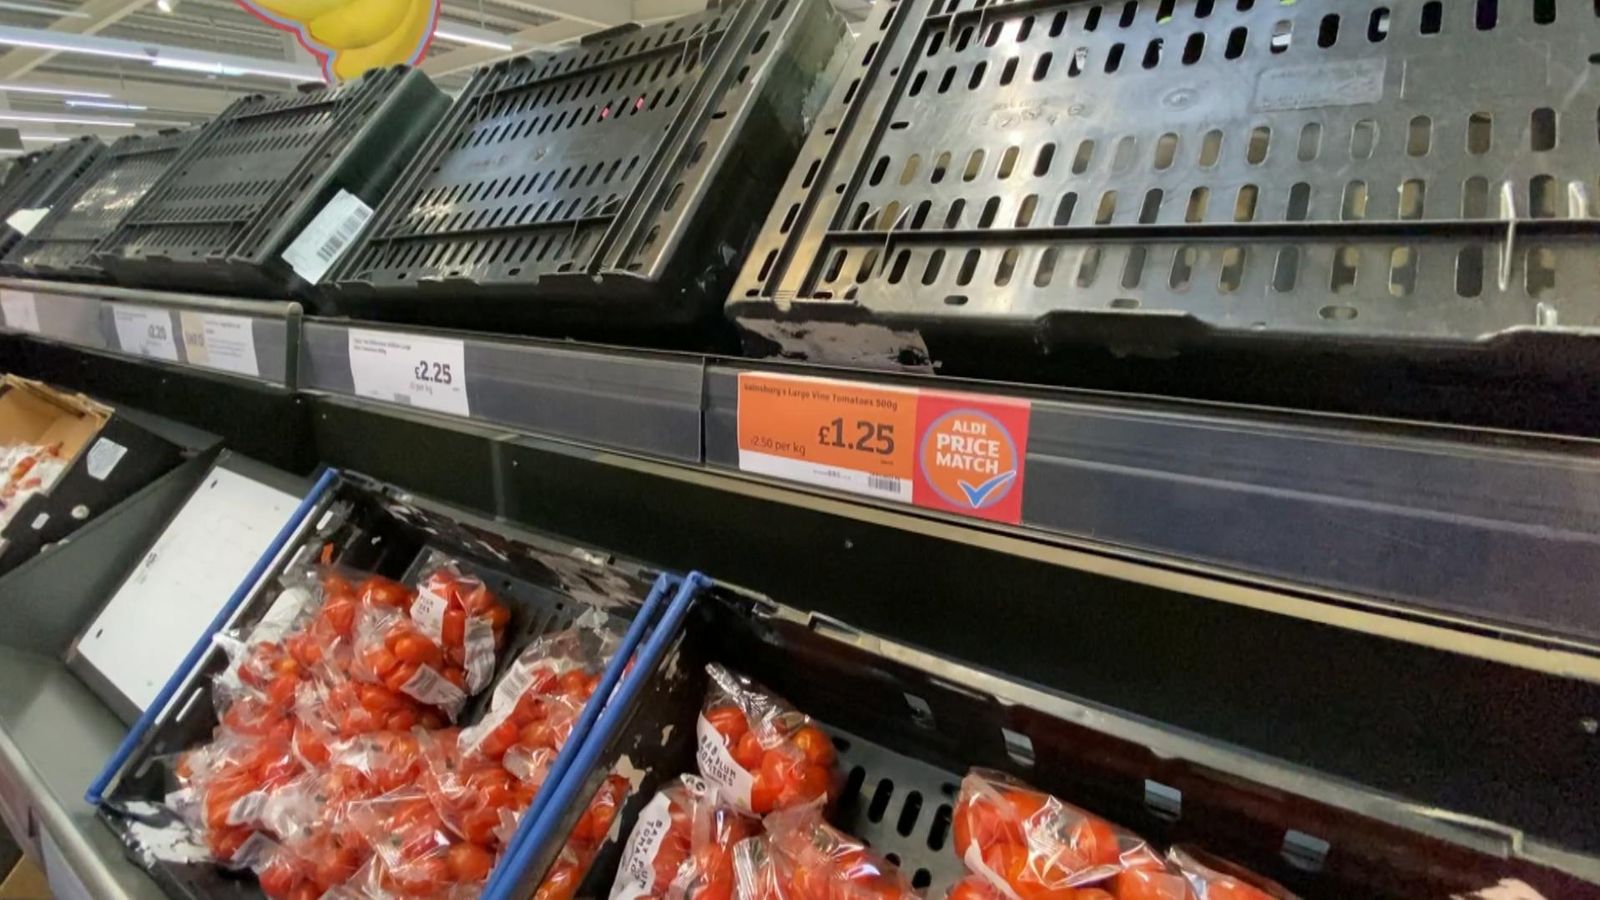 British tomato shortage could last until end of April, warns UK's largest grower